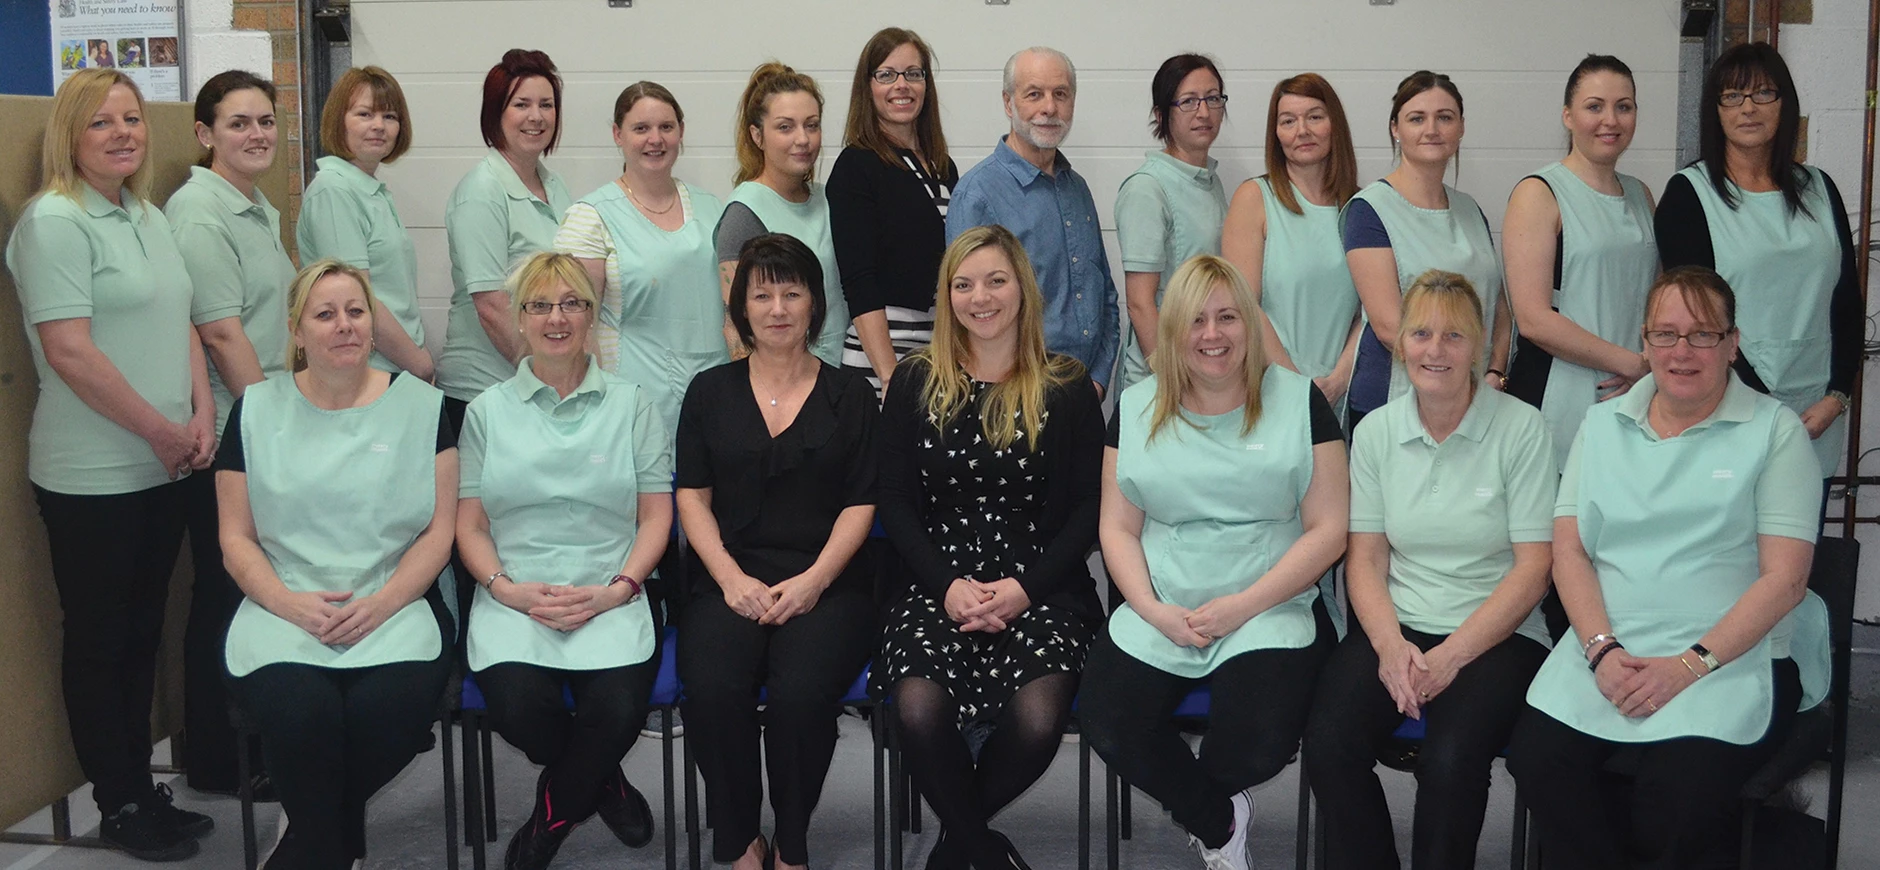 Vanessa Barley & Bob Smith (back row centre) with the team at Merry Maids of Hull and East Yorkshire